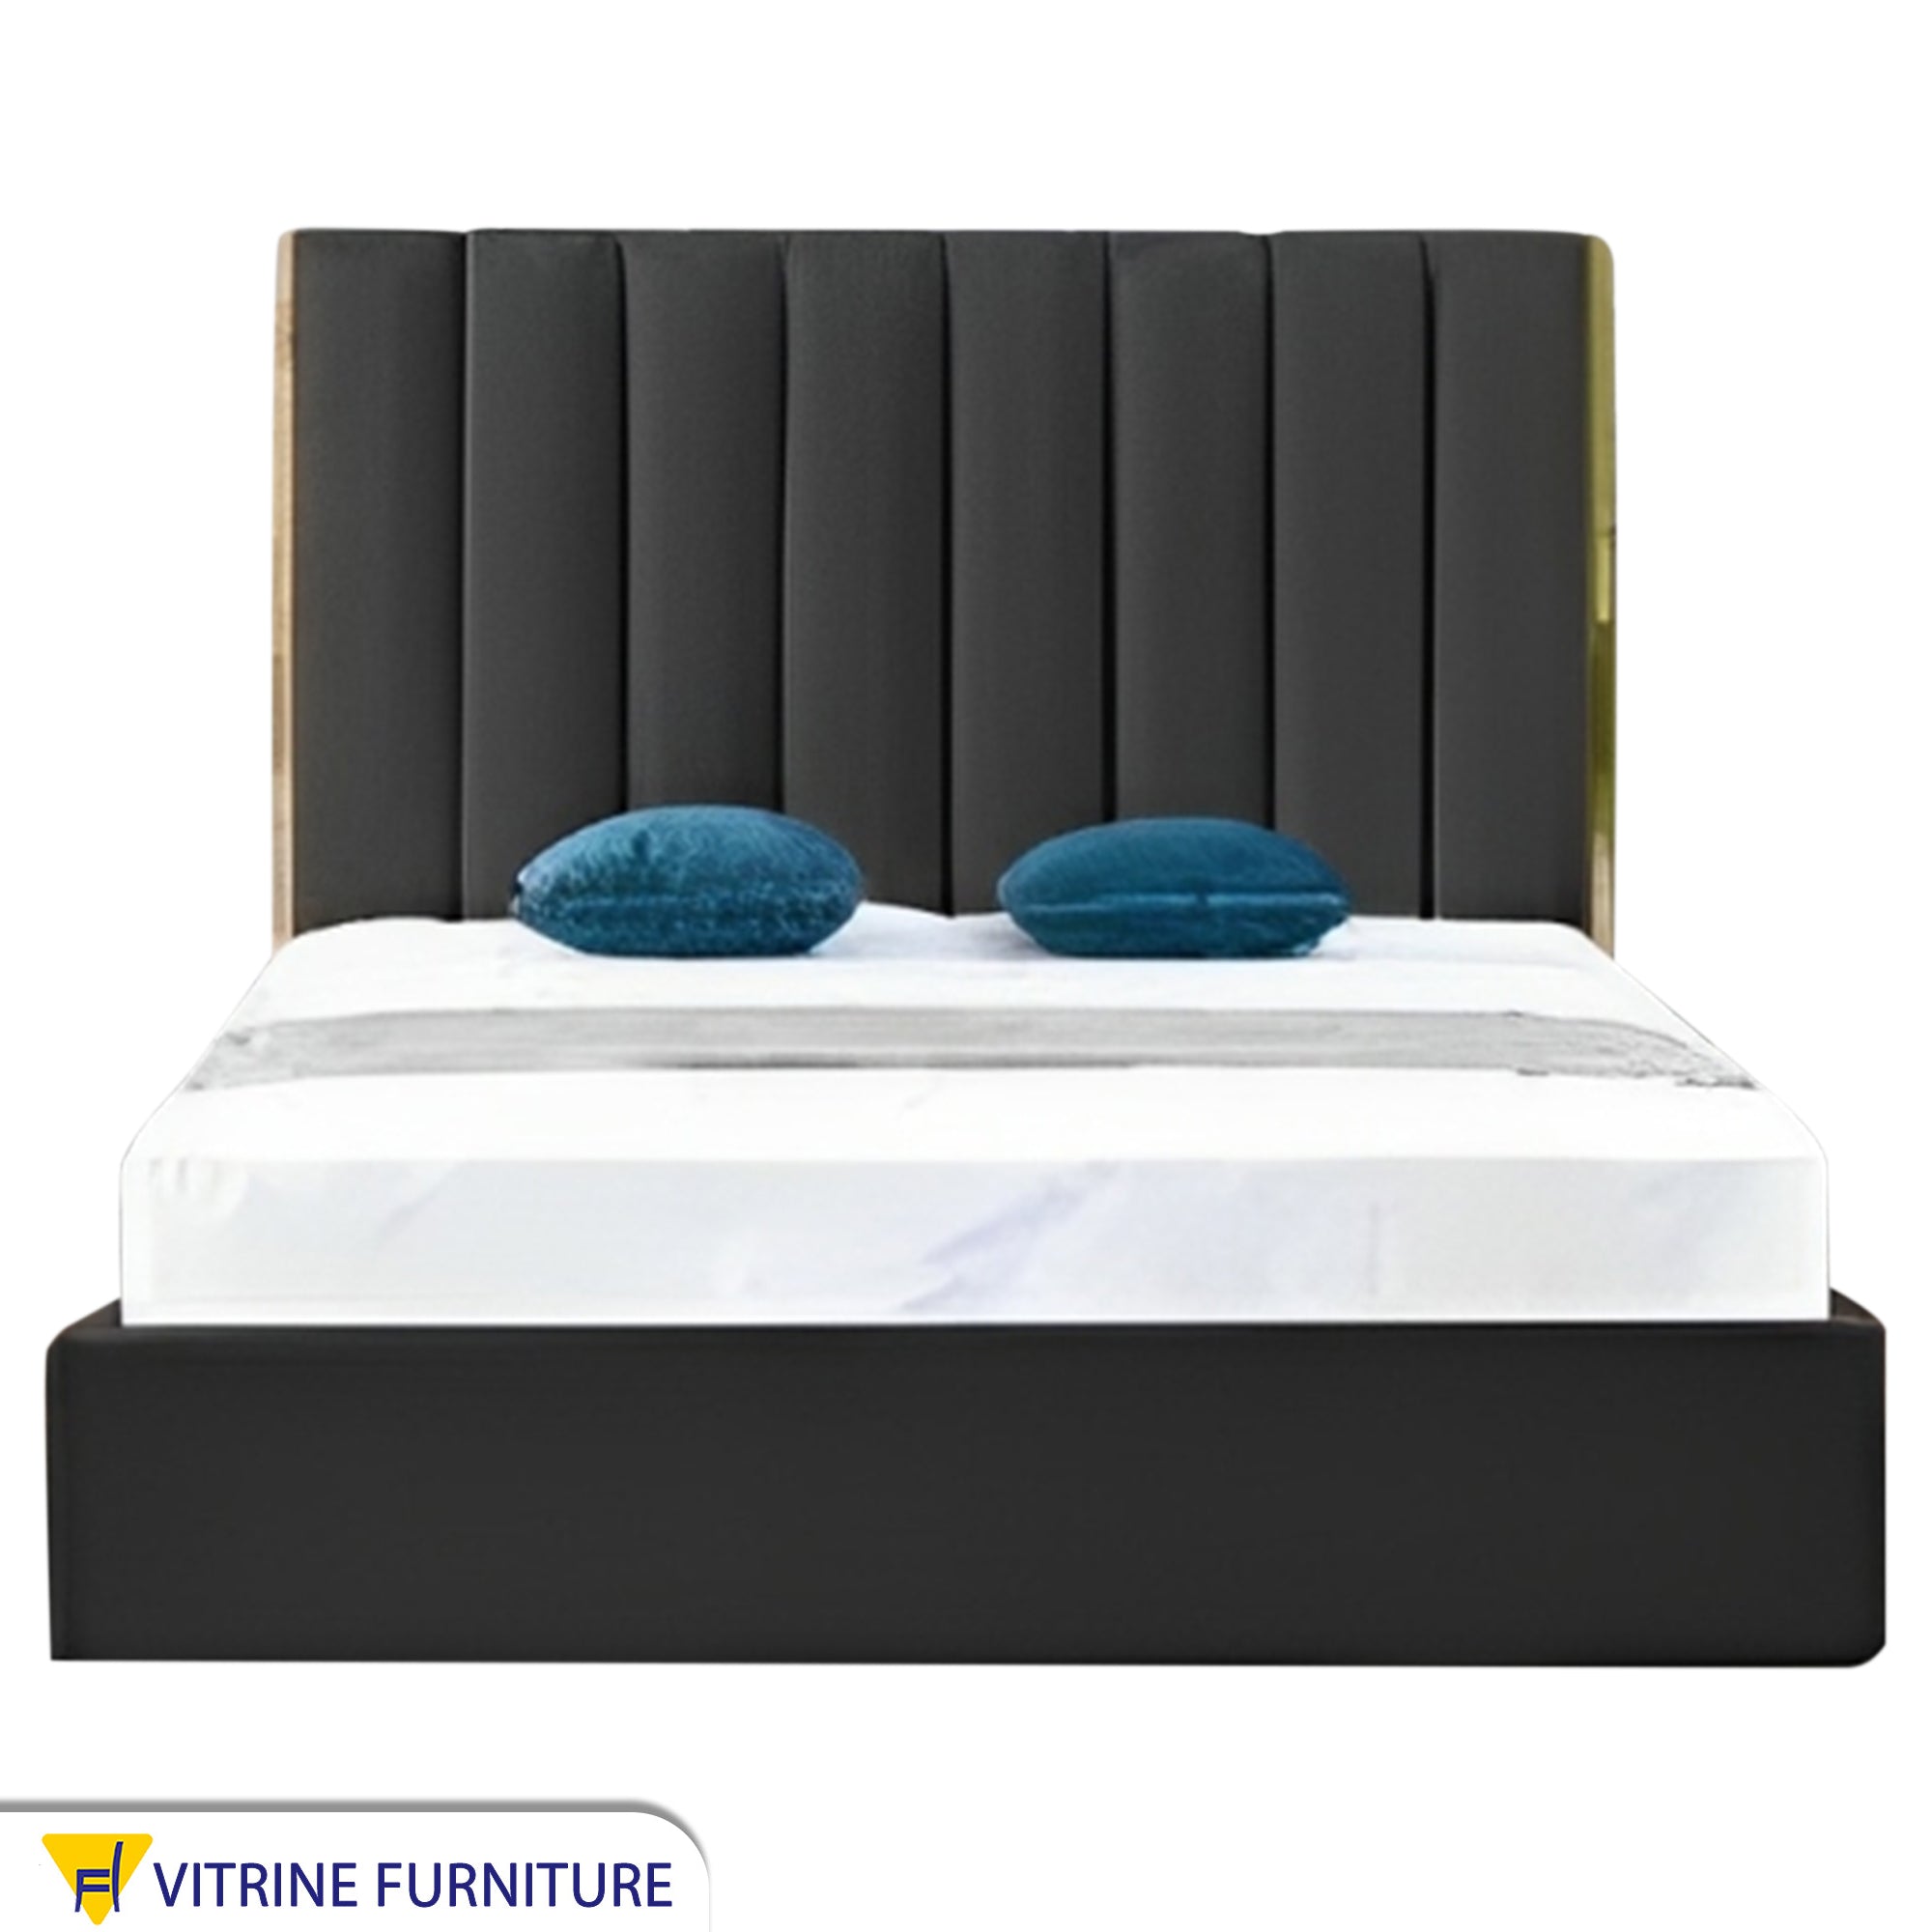 Single bed divided lengthwise